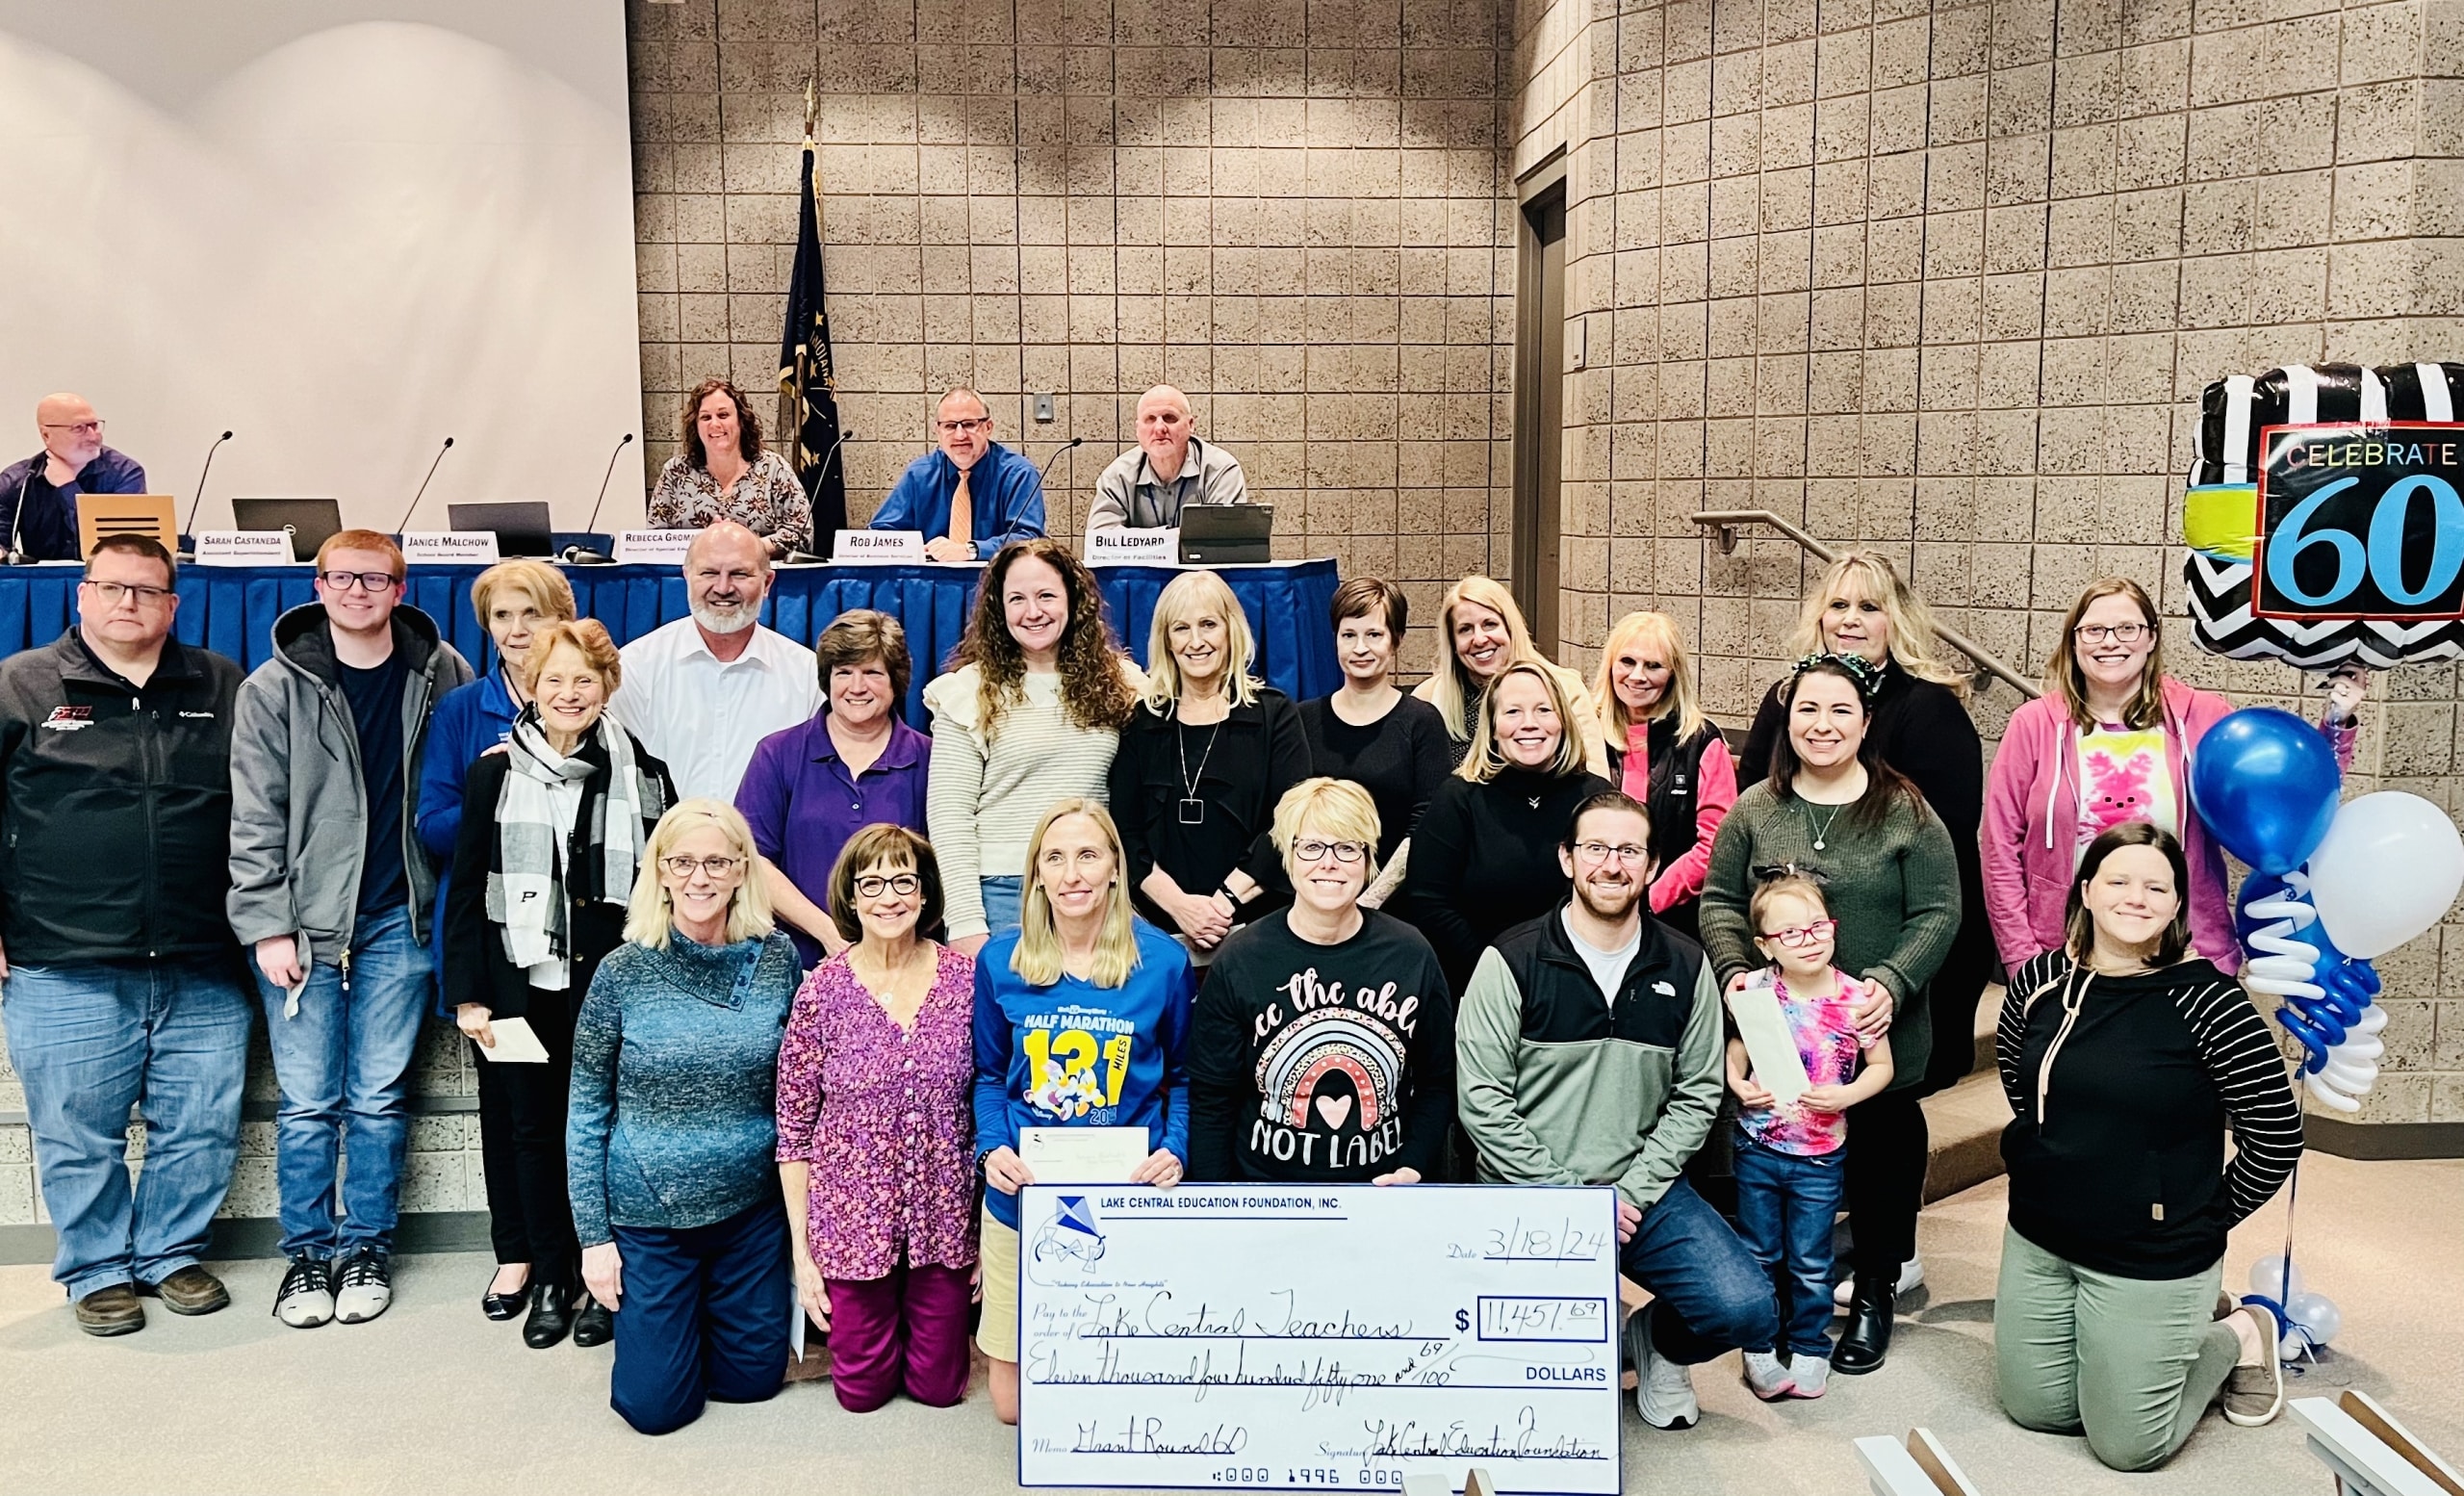 Congratulations to the Lake Central teachers who were grant recipients during the 60th round of grants from the Lake Central Education Foundation. We appreciate the LCEF for providing these wonderful opportunities to our staff.